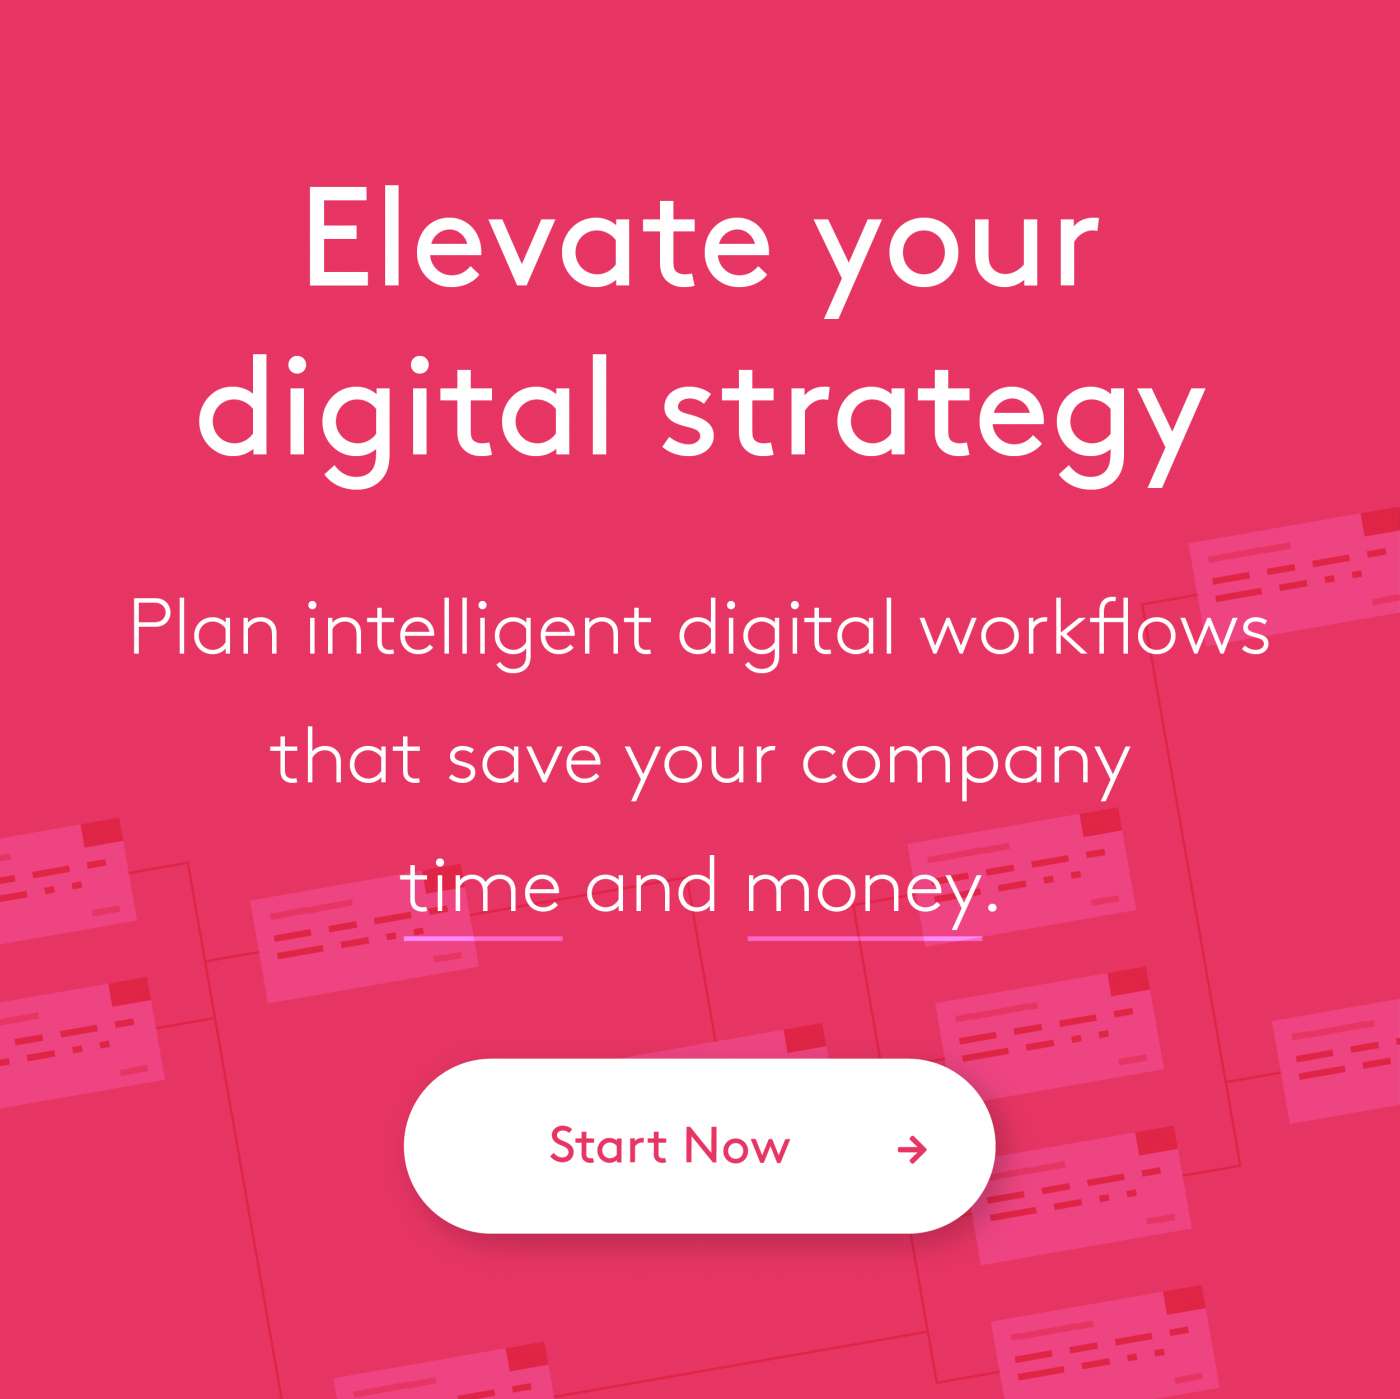 Elevate Your Digital Strategy